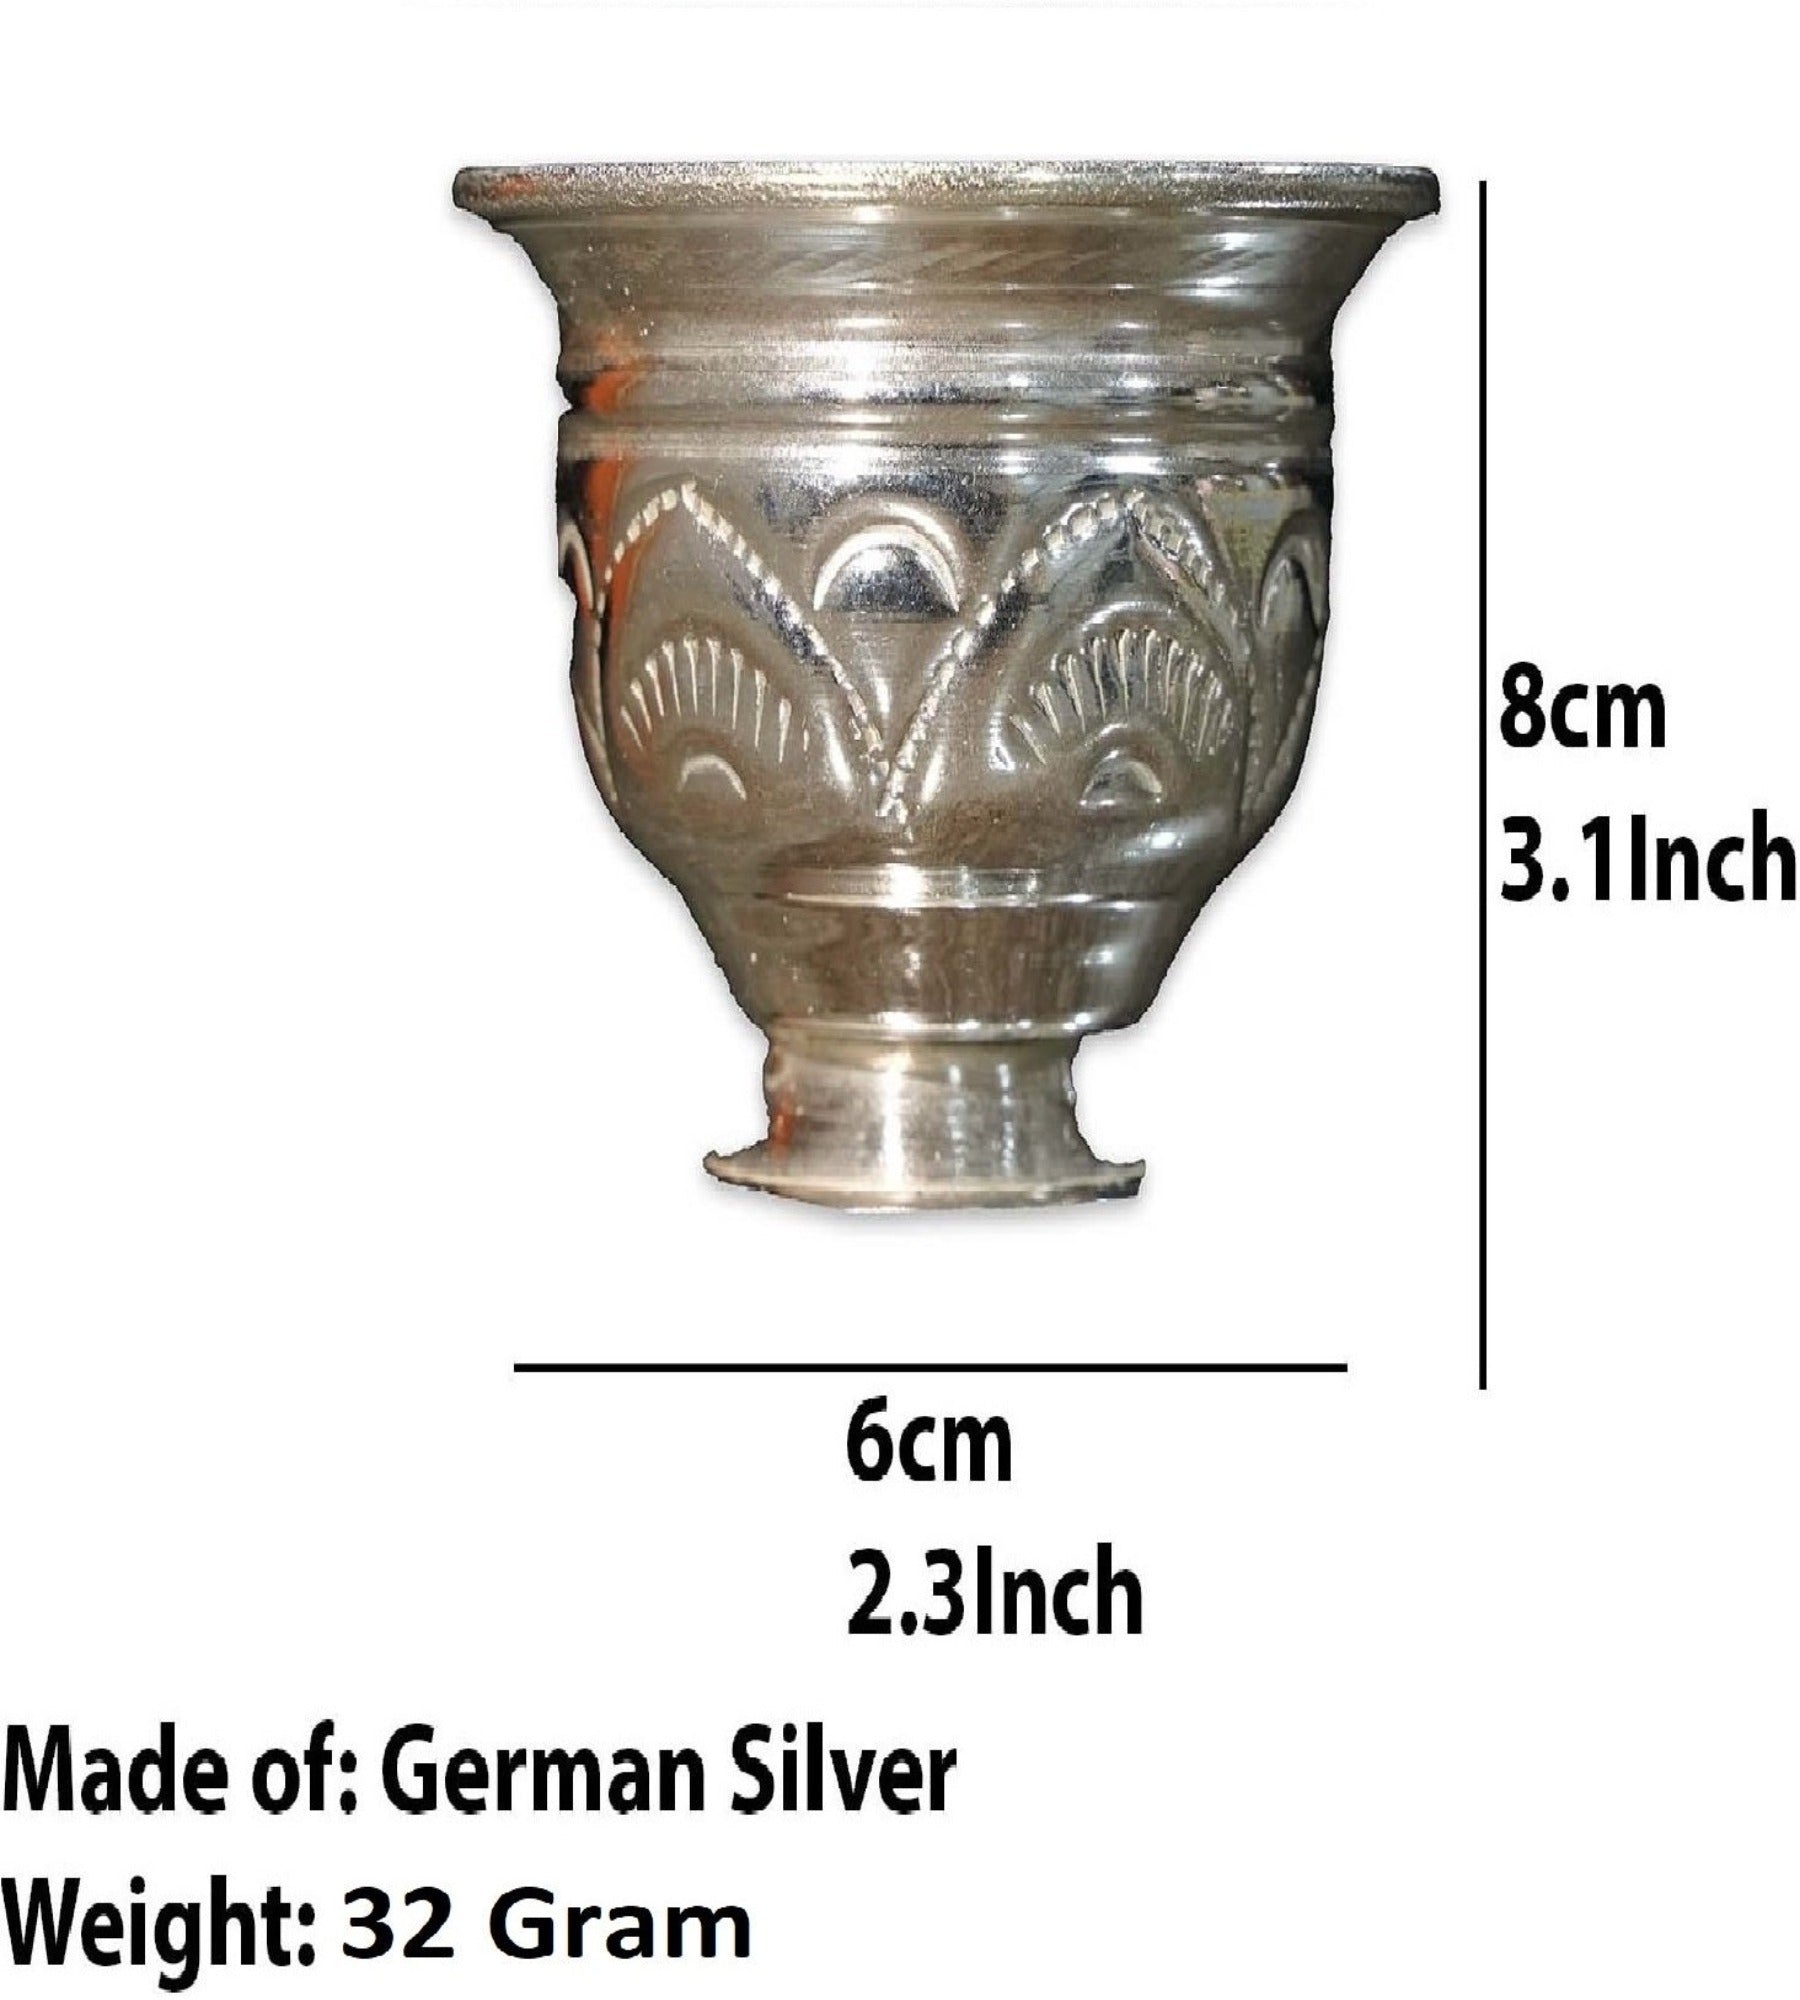 German Silver KumKum Barani is best for Home, Office and Temple Poojas K3115